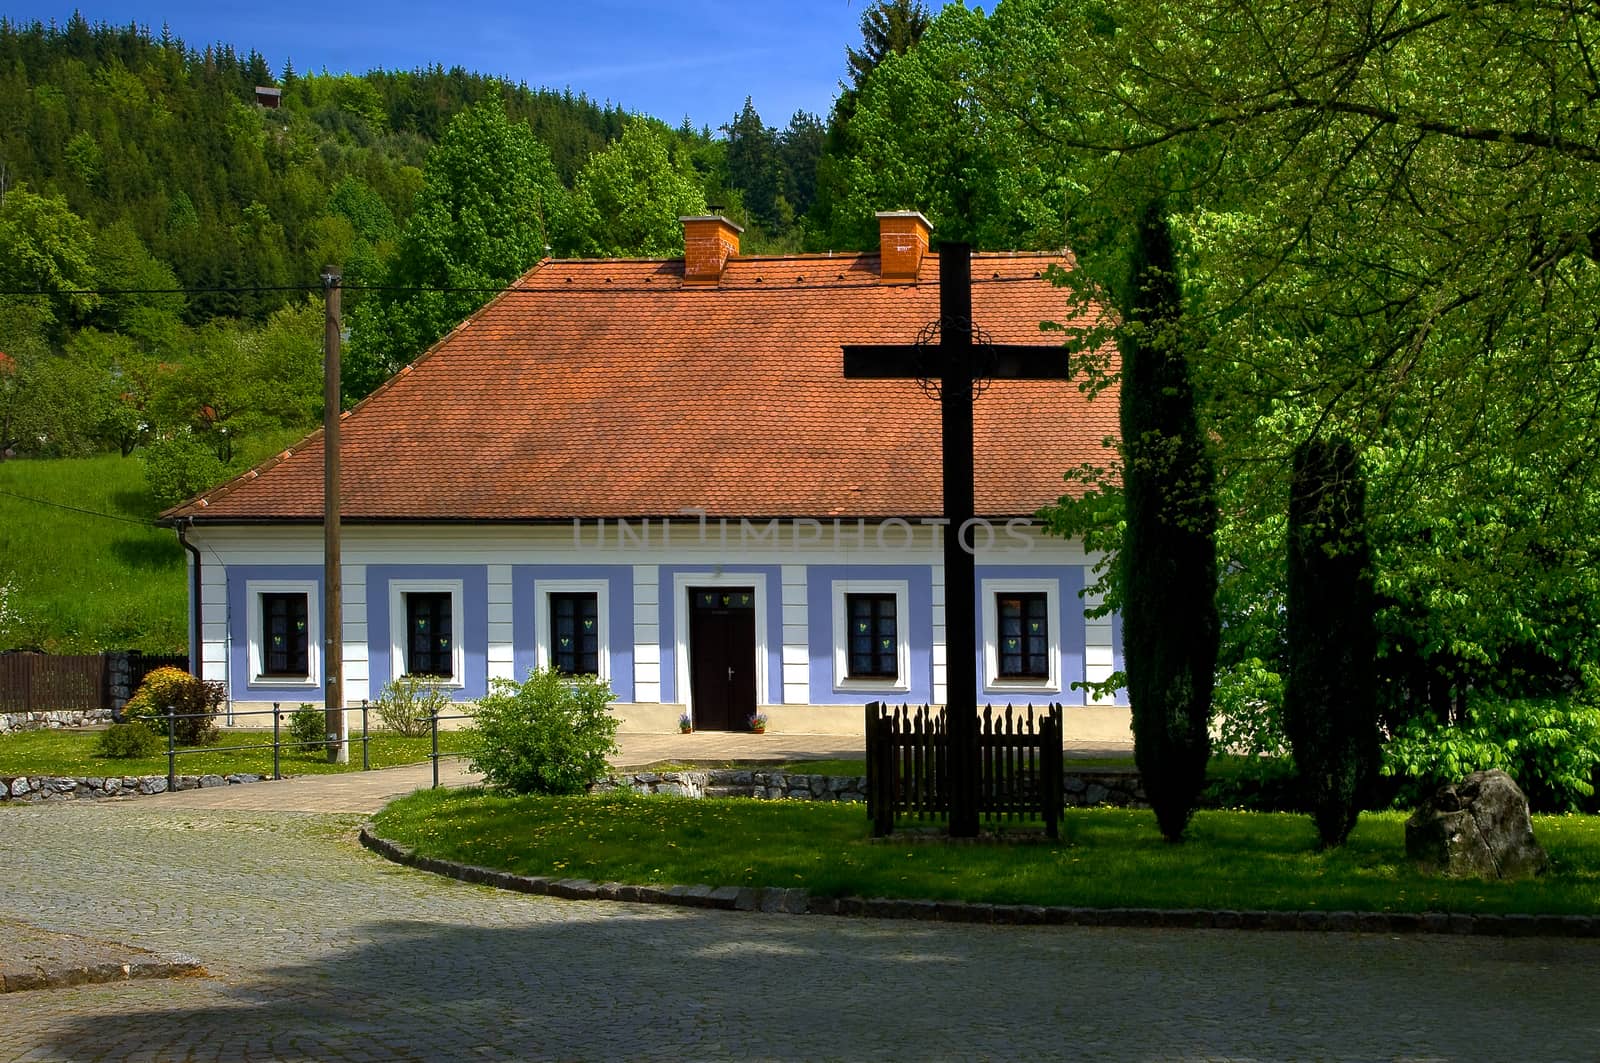 Rectory in Sloup township, South Moravia, Czech Republic.